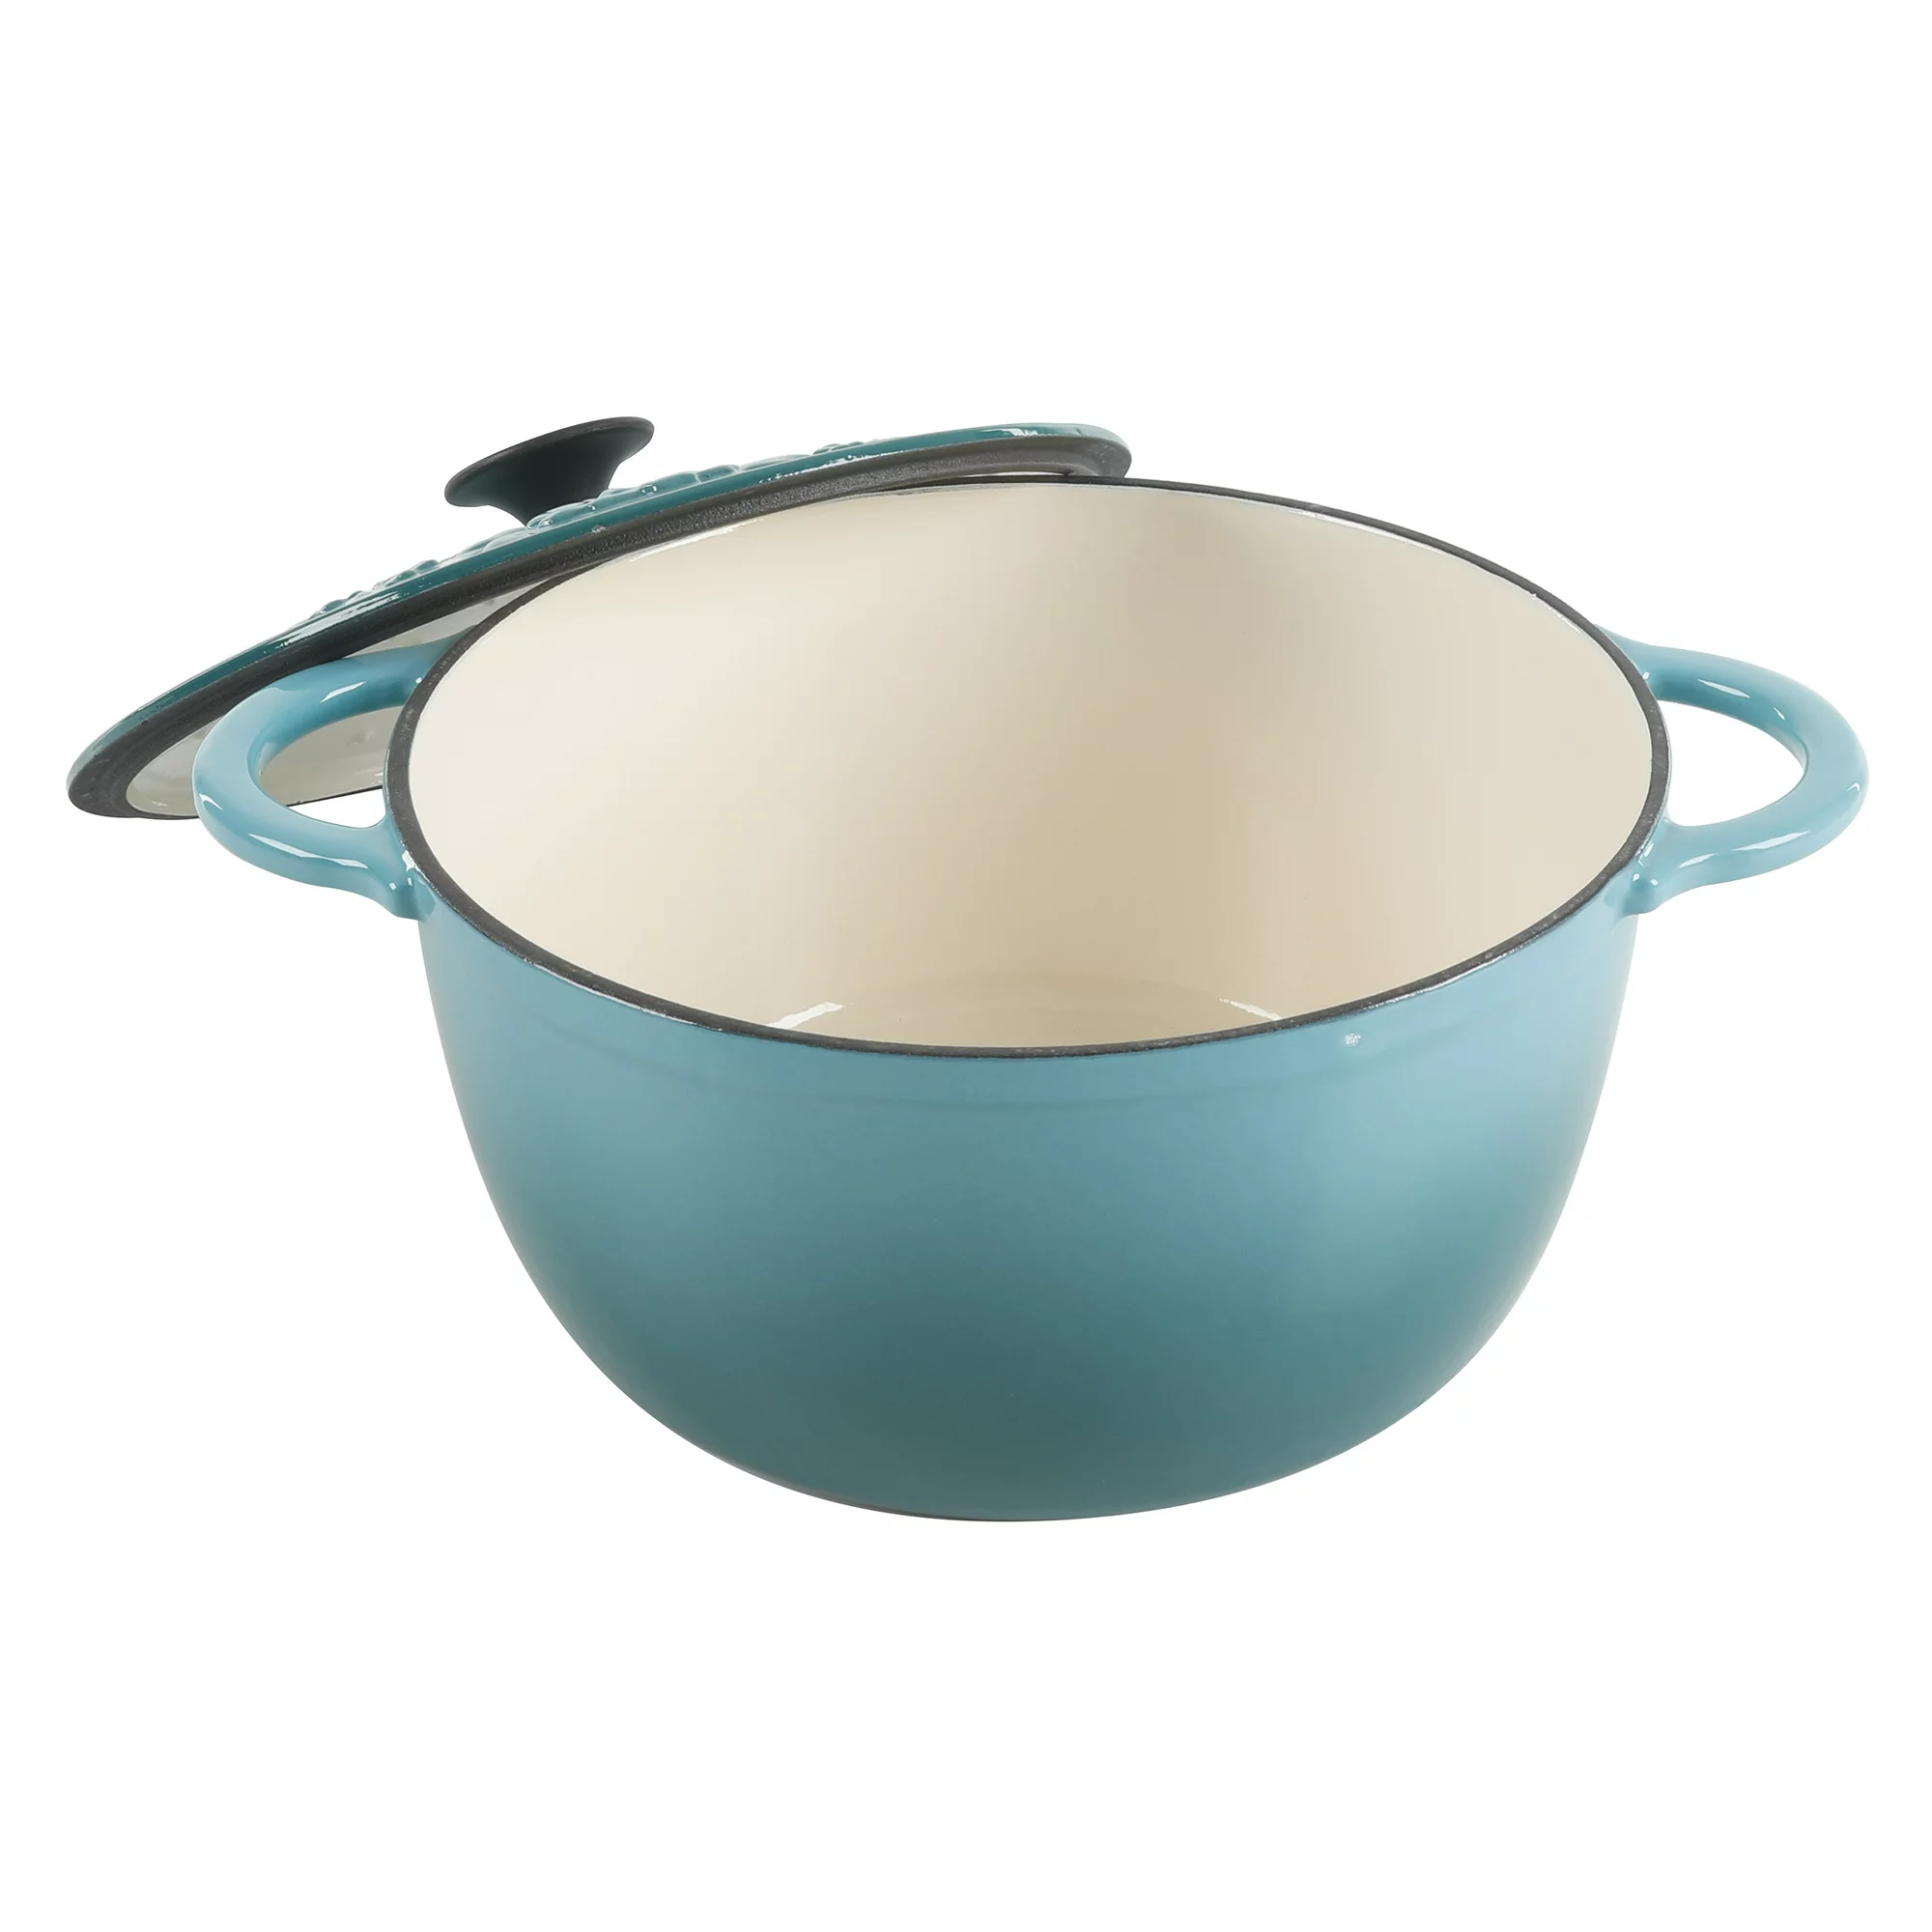 https://discounttoday.net/wp-content/uploads/2022/12/The-Pioneer-Woman-Timeless-Beauty-Enamel-on-Cast-Iron-6-Qt-Dutch-Oven-Turquoise3.webp